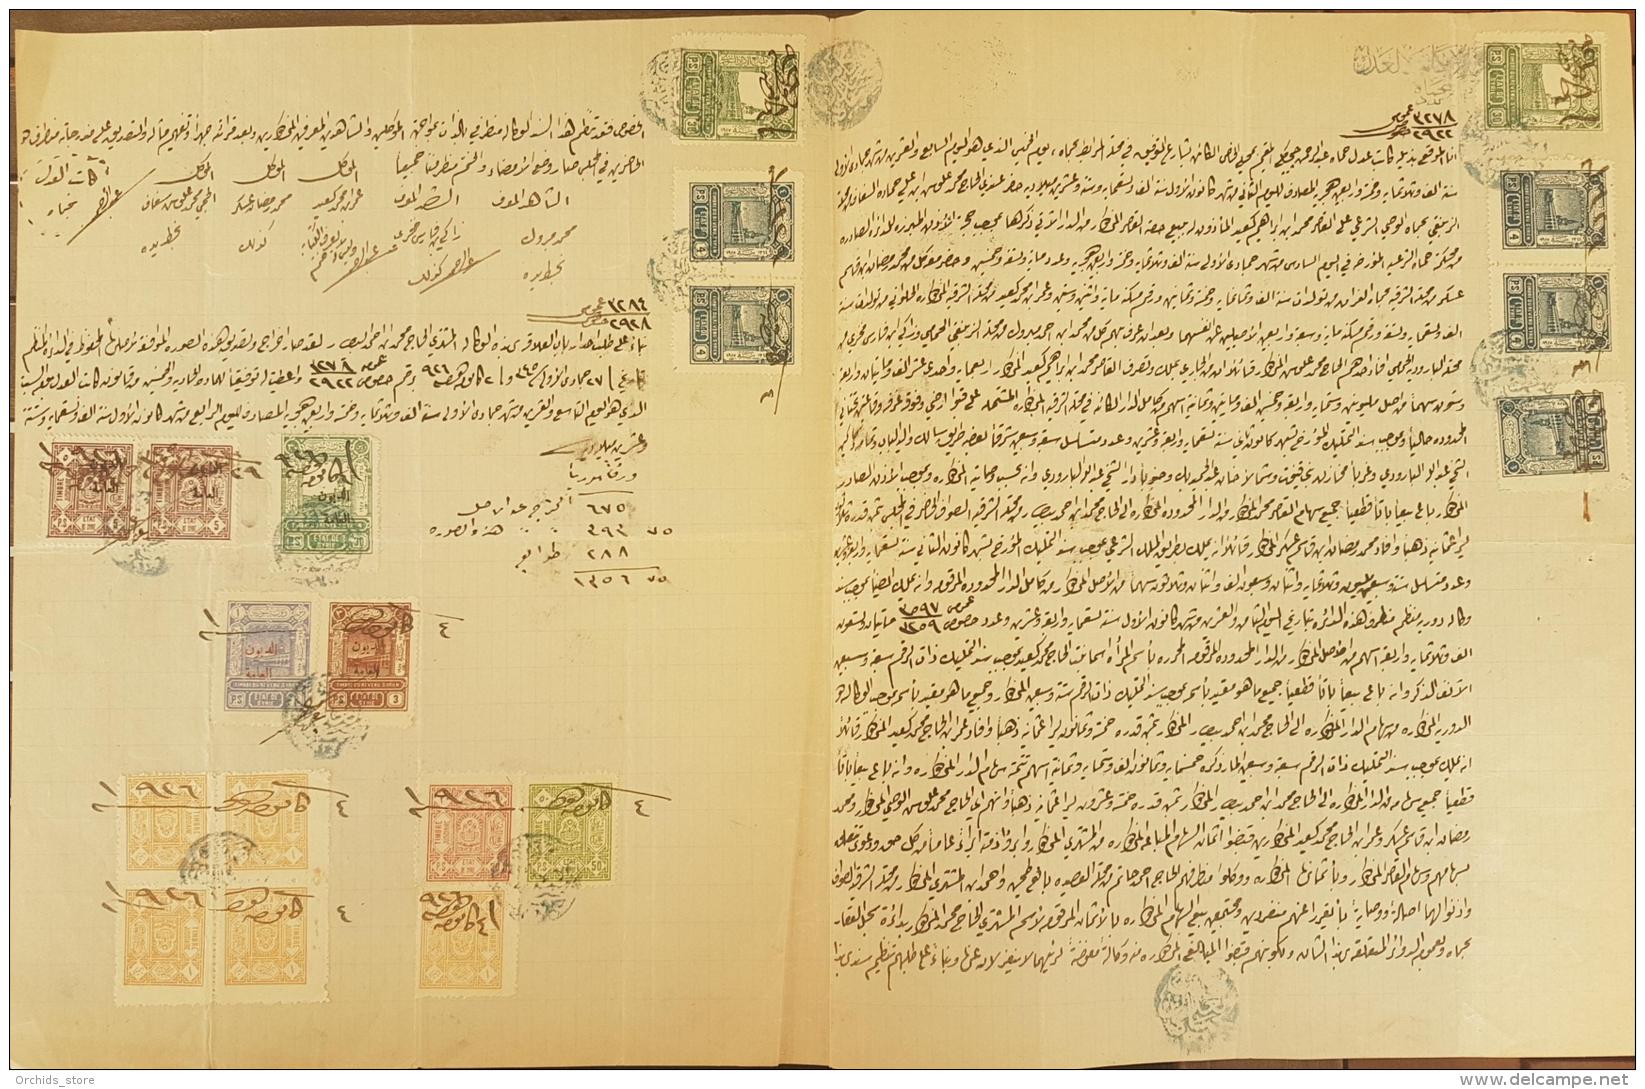 Syria 1927 Large Size Marvelous Document Franked With 19 Justice, Dette Publique &amp; Fiscal Revenue Stamps - Syria